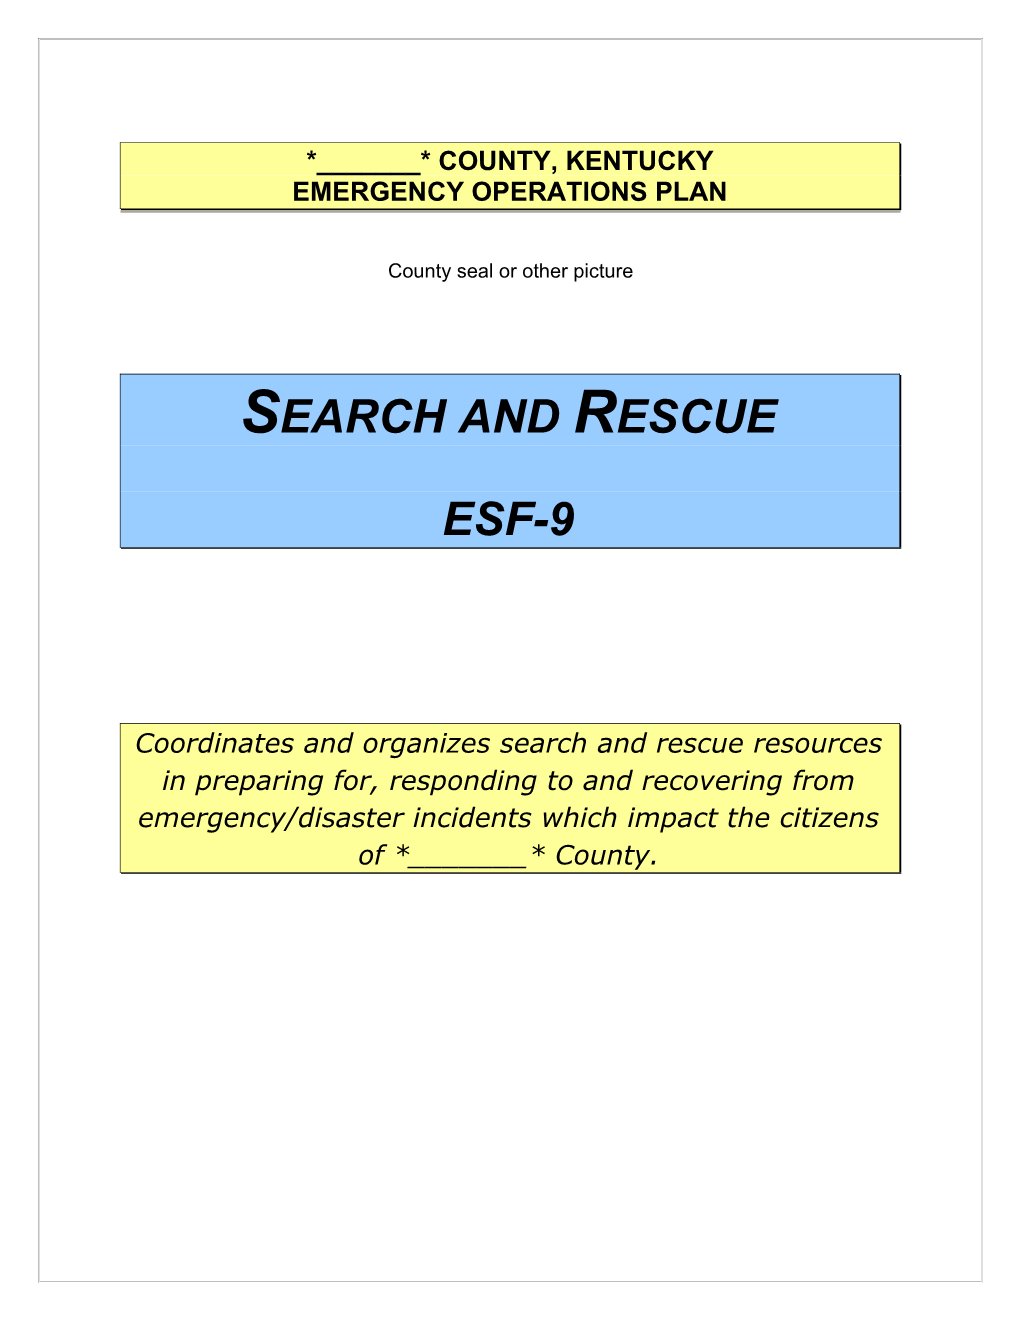 ESF 09 Search and Rescue